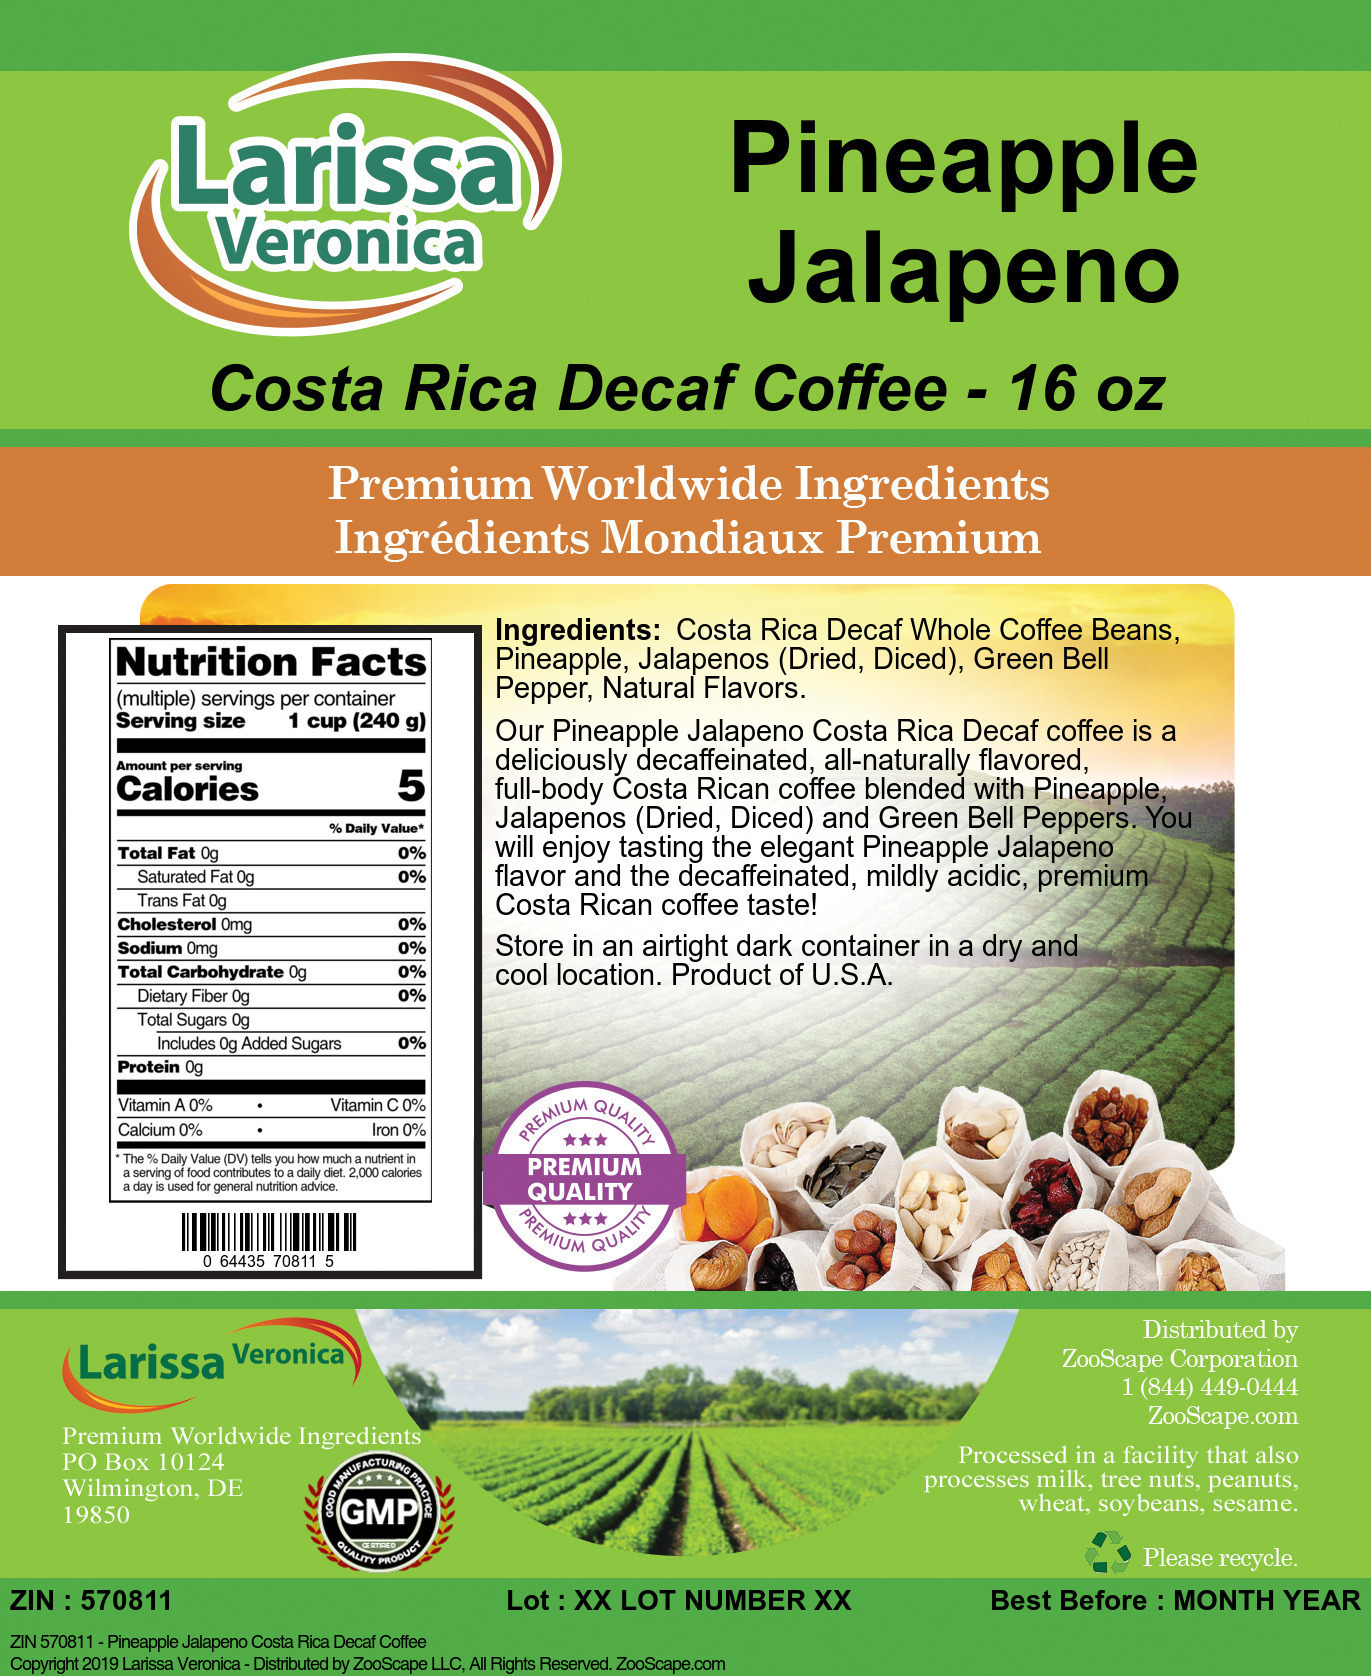 Pineapple Jalapeno Costa Rica Decaf Coffee - Label